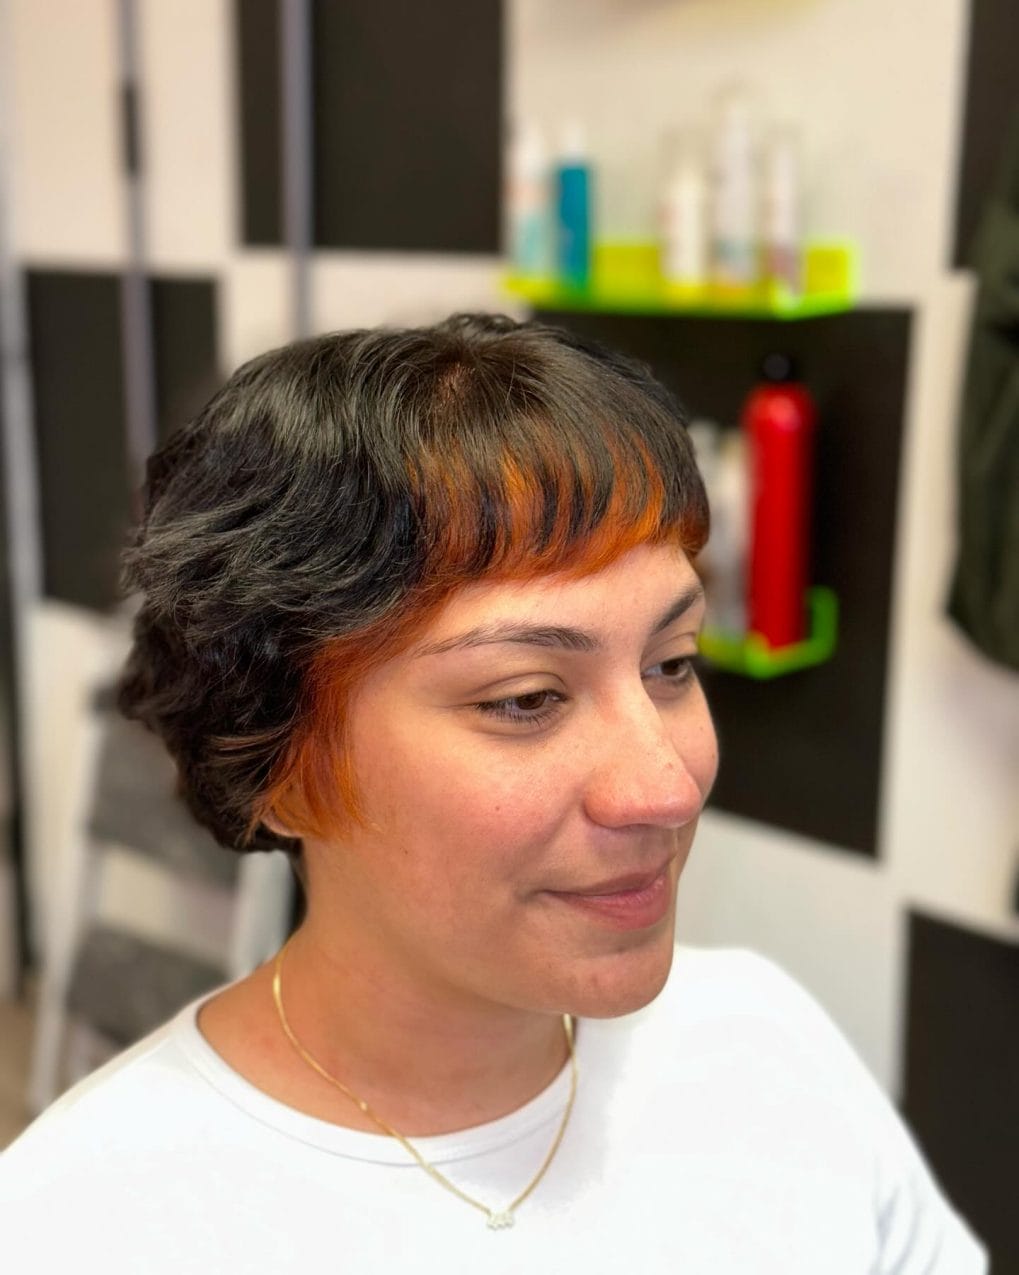 Short cut with bold orange streaks and soft curls